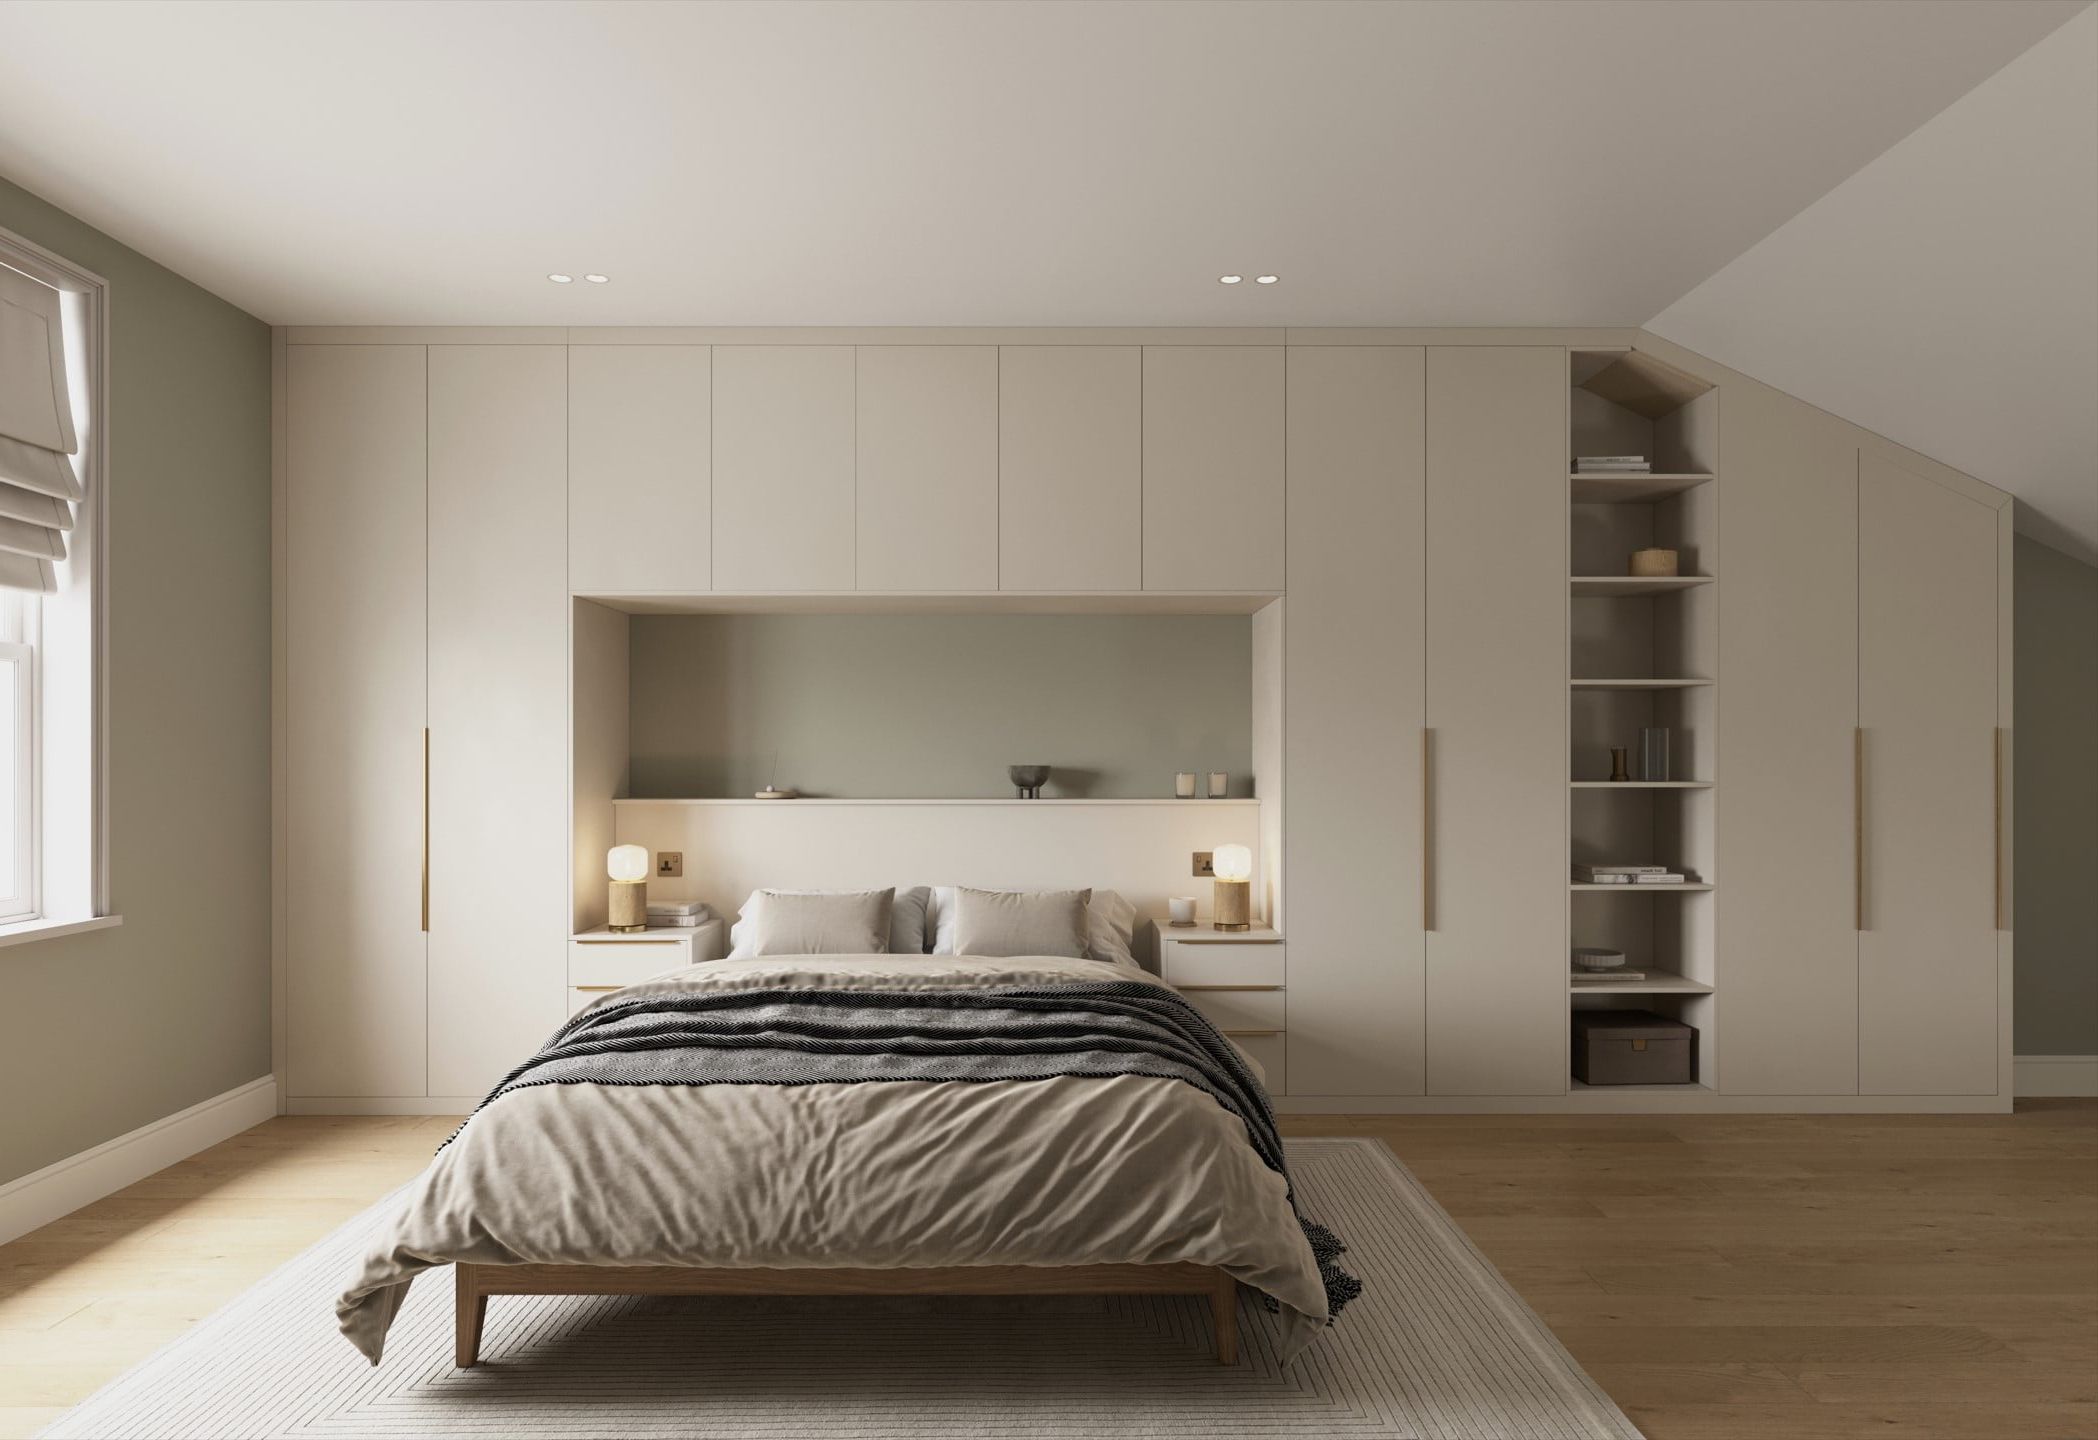 Overbed Fitted Wardrobes And Storage Units, Bespoke Overhead Storage Intended For Overbed Wardrobes (View 10 of 20)